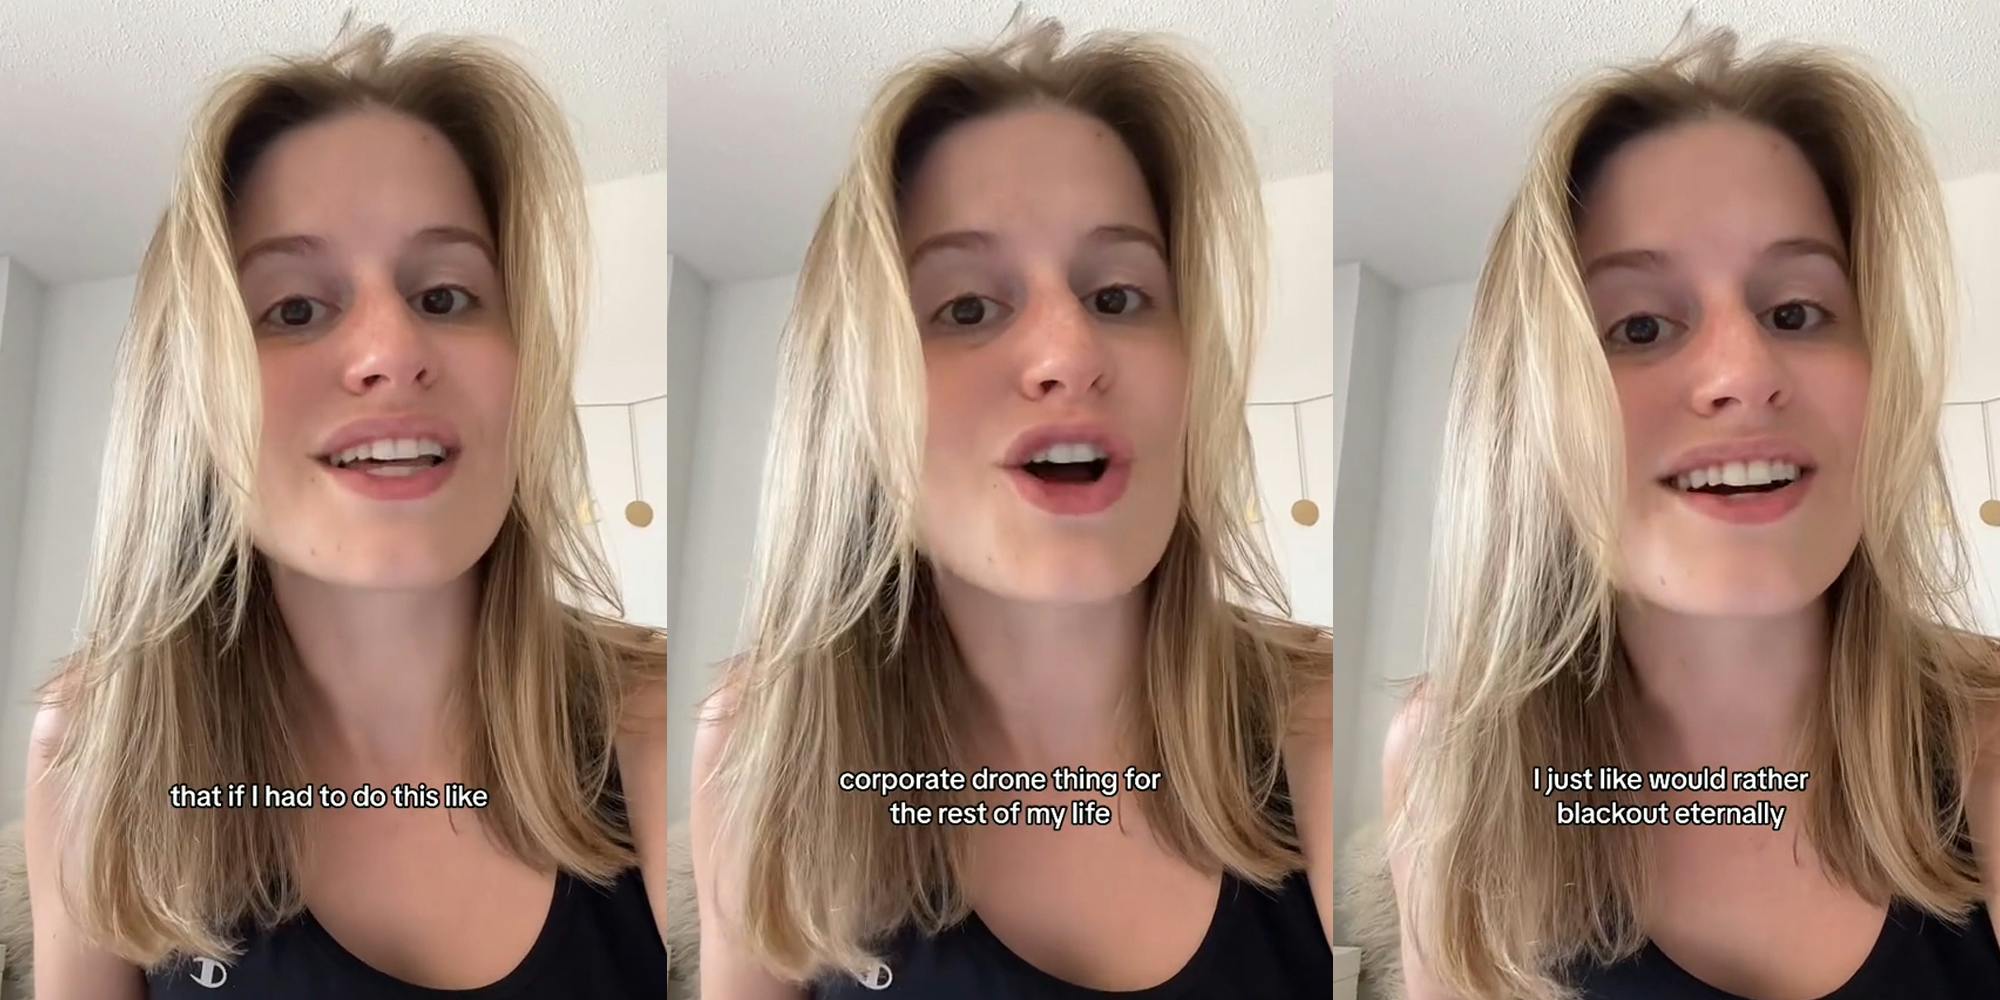 Woman reveals how Gucci fired her because of viral TikTok about freebies -  Dexerto